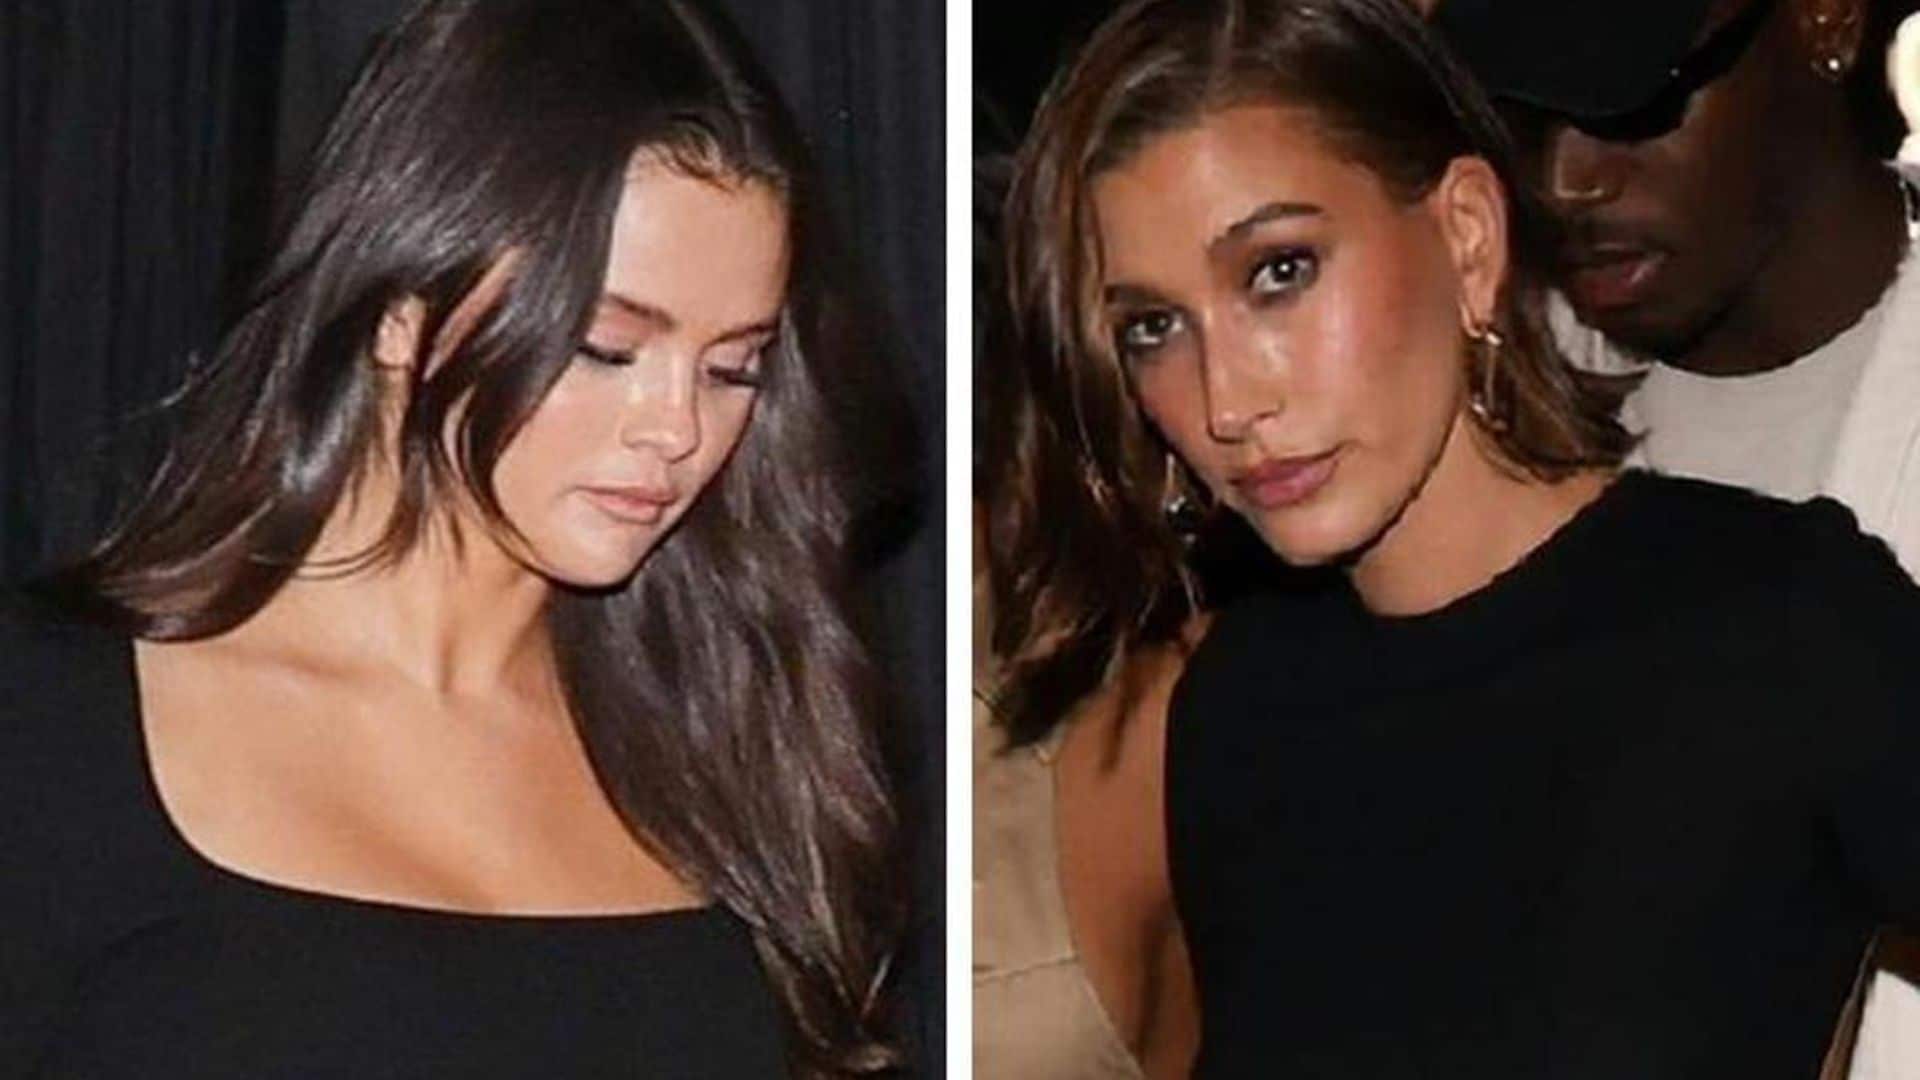 Selena Gomez and Hailey Bieber arrive at Paris after-party in matching styles